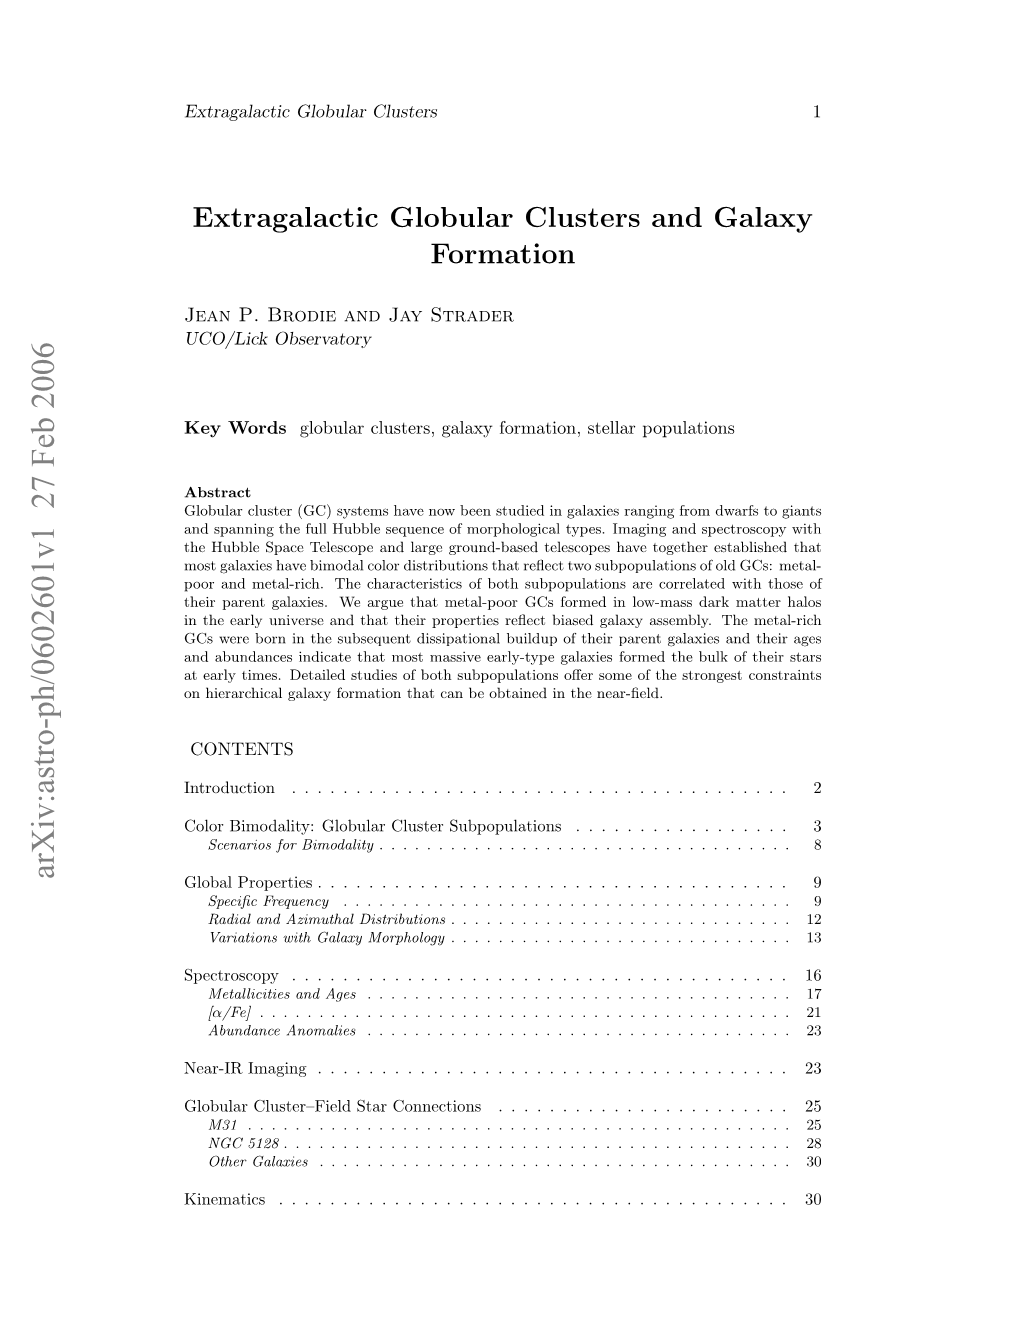 Extragalactic Globular Clusters and Galaxy Formation